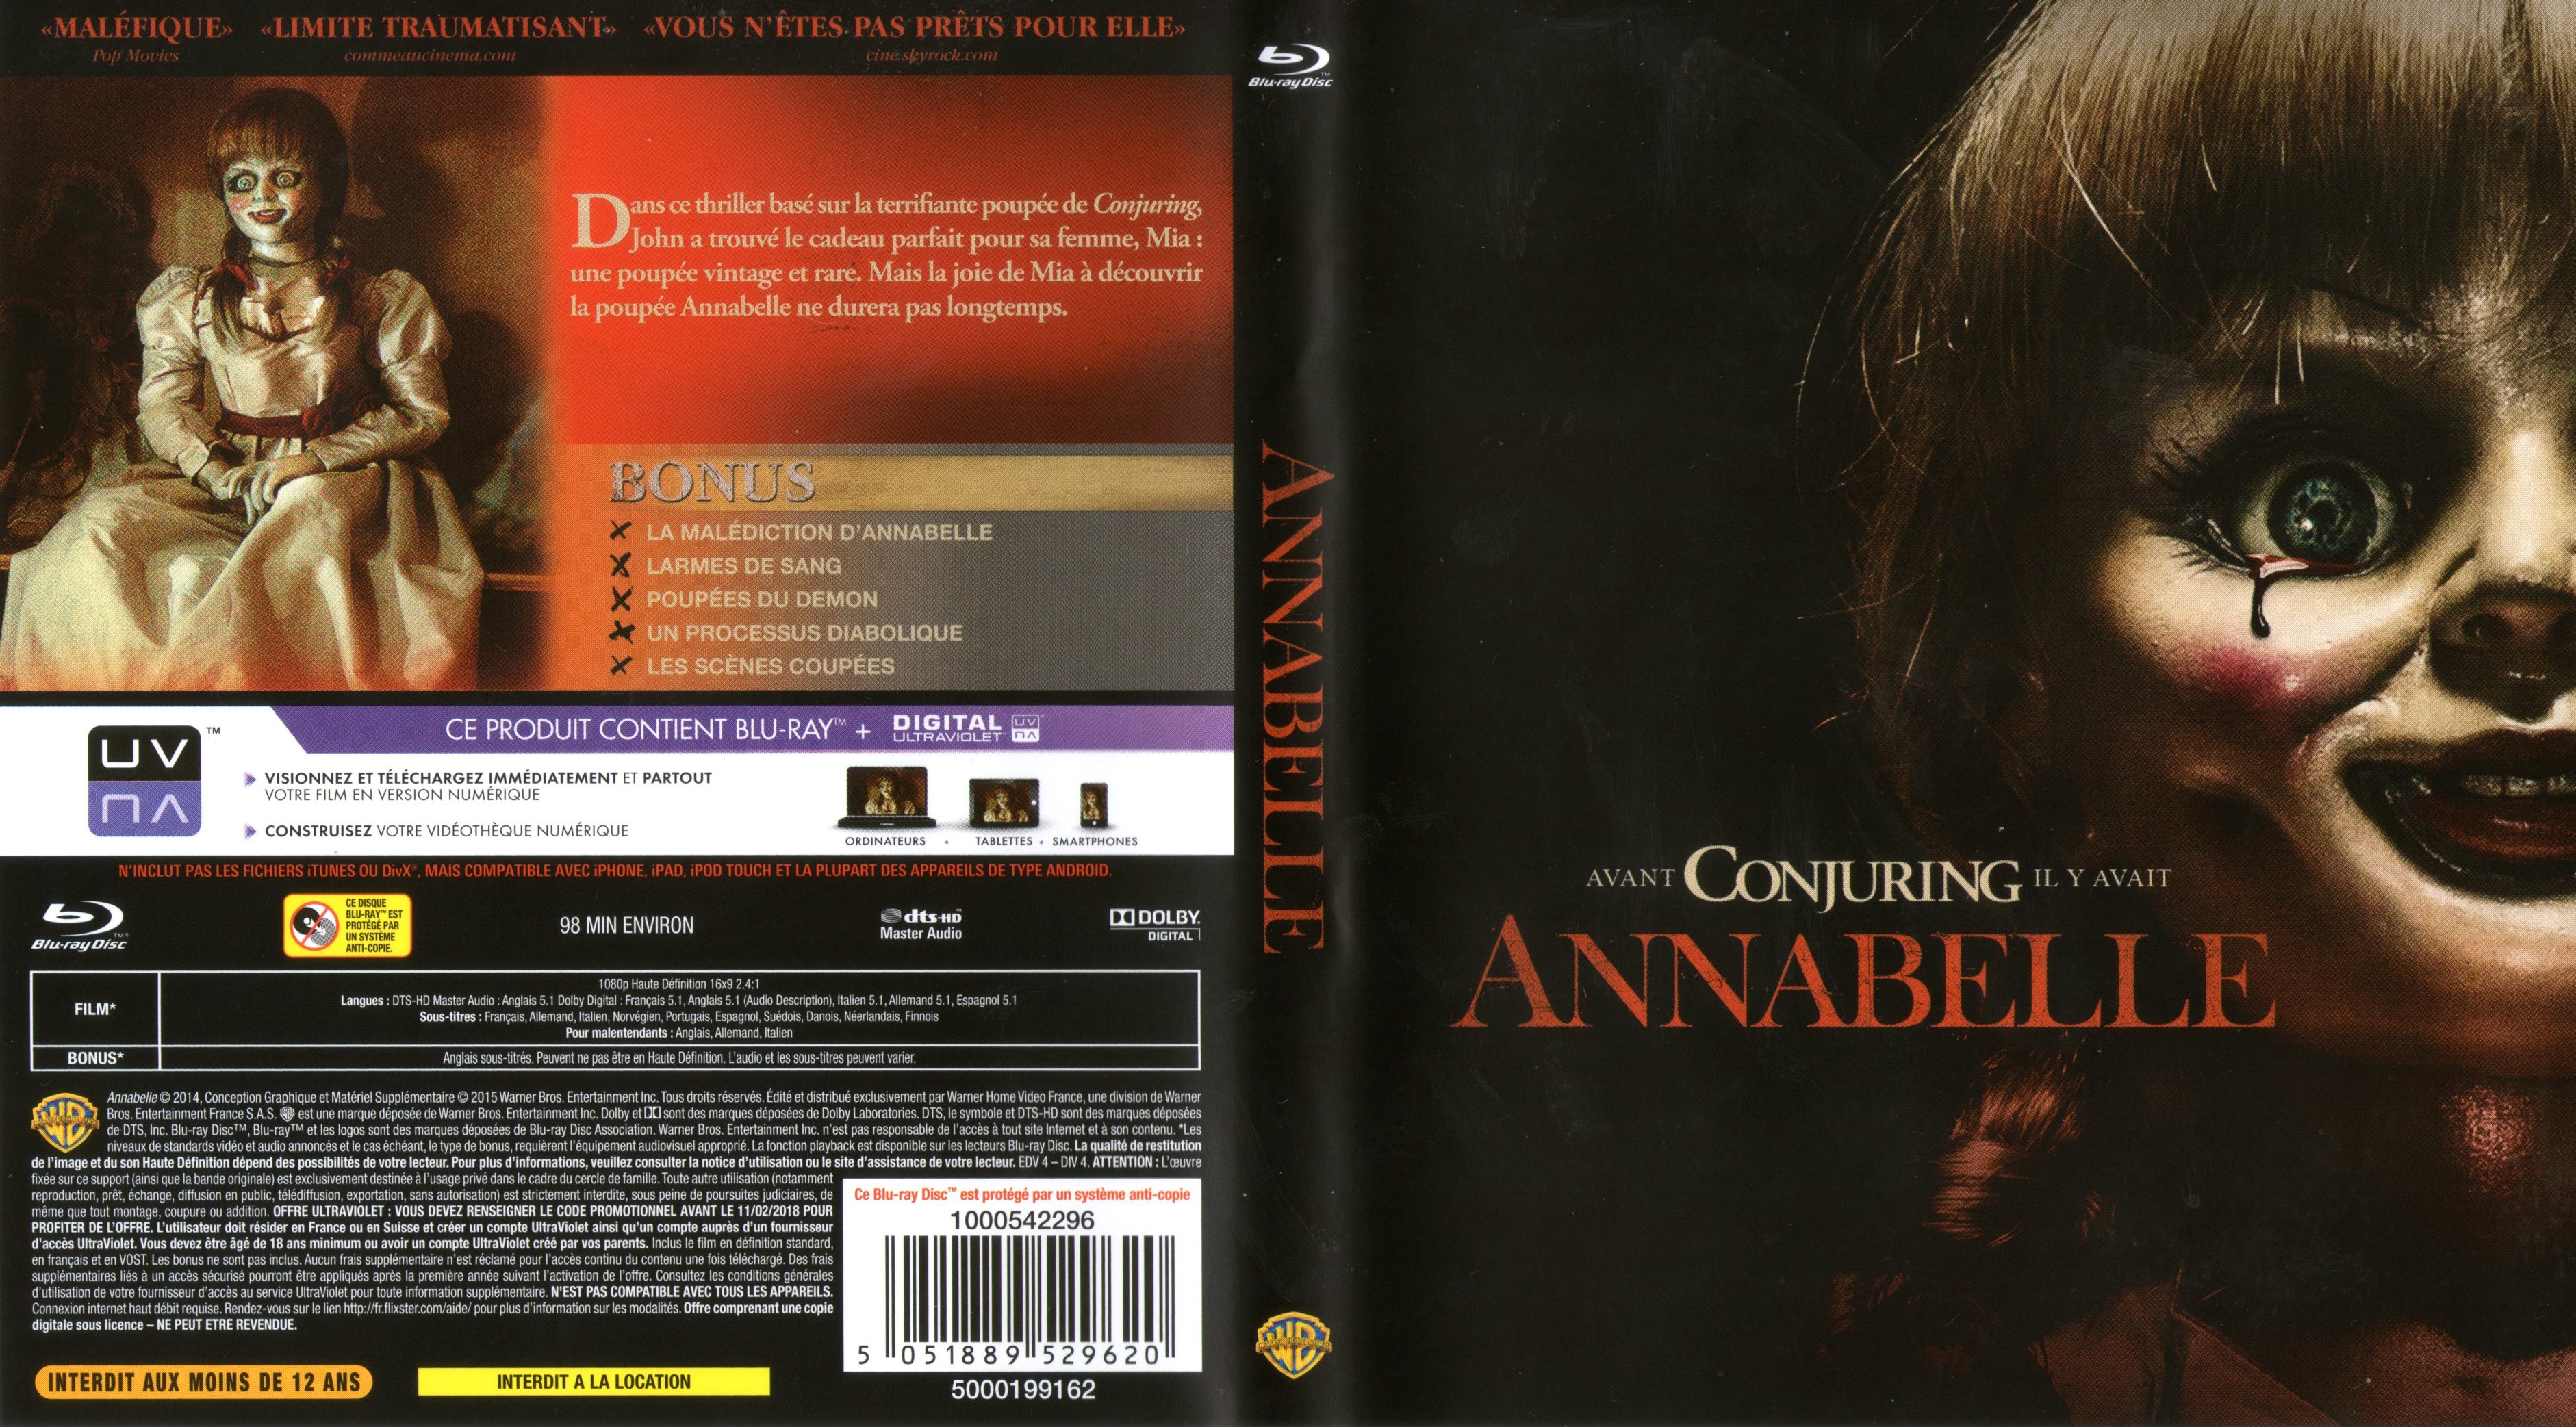 Jaquette DVD Annabelle (BLU-RAY)